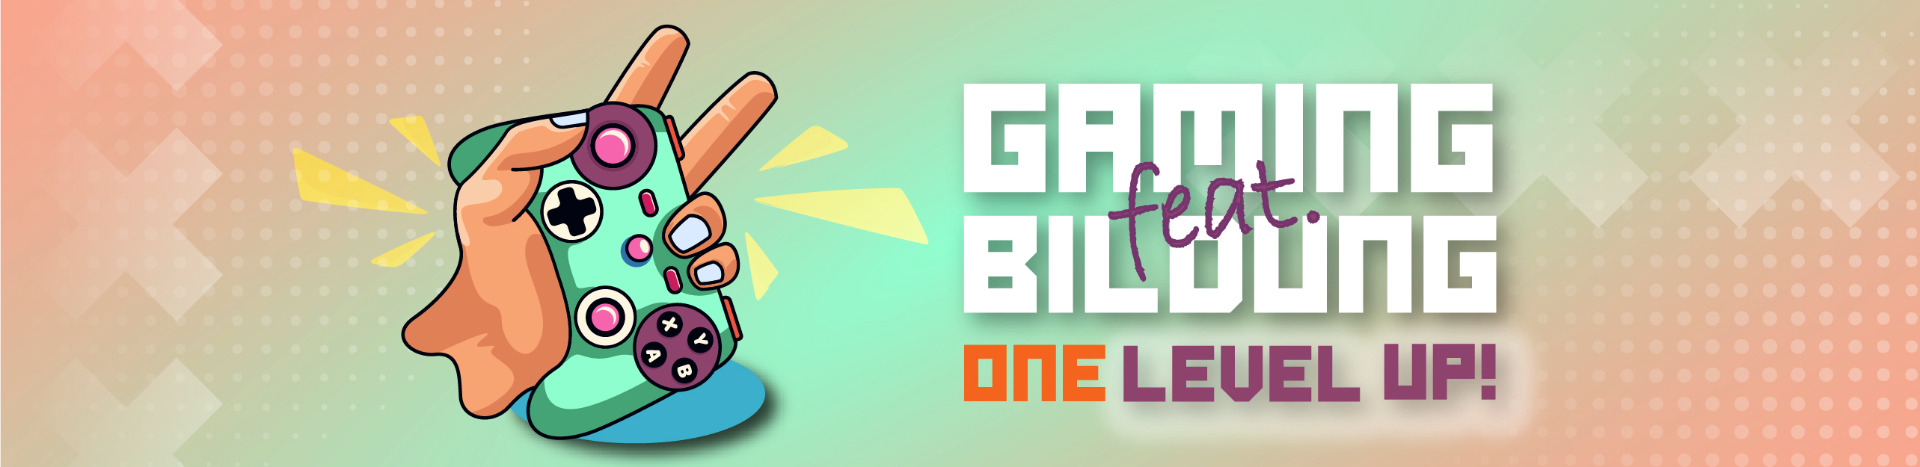 Gaming feat. Bildung – one level up!